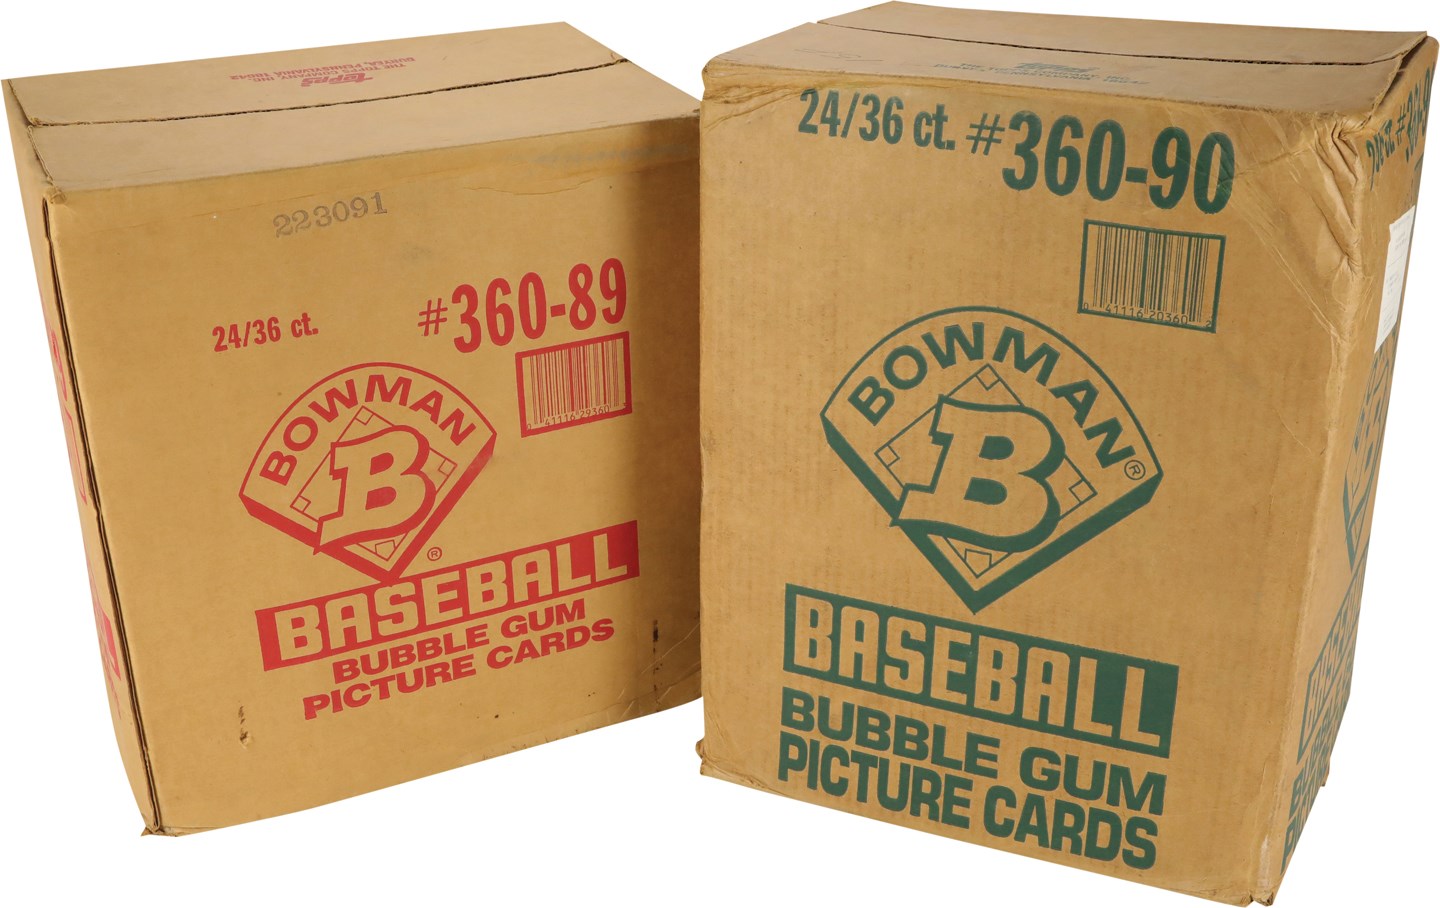 - 1989 & 1990 Bowman Opened 24/36 Wax Box Cases